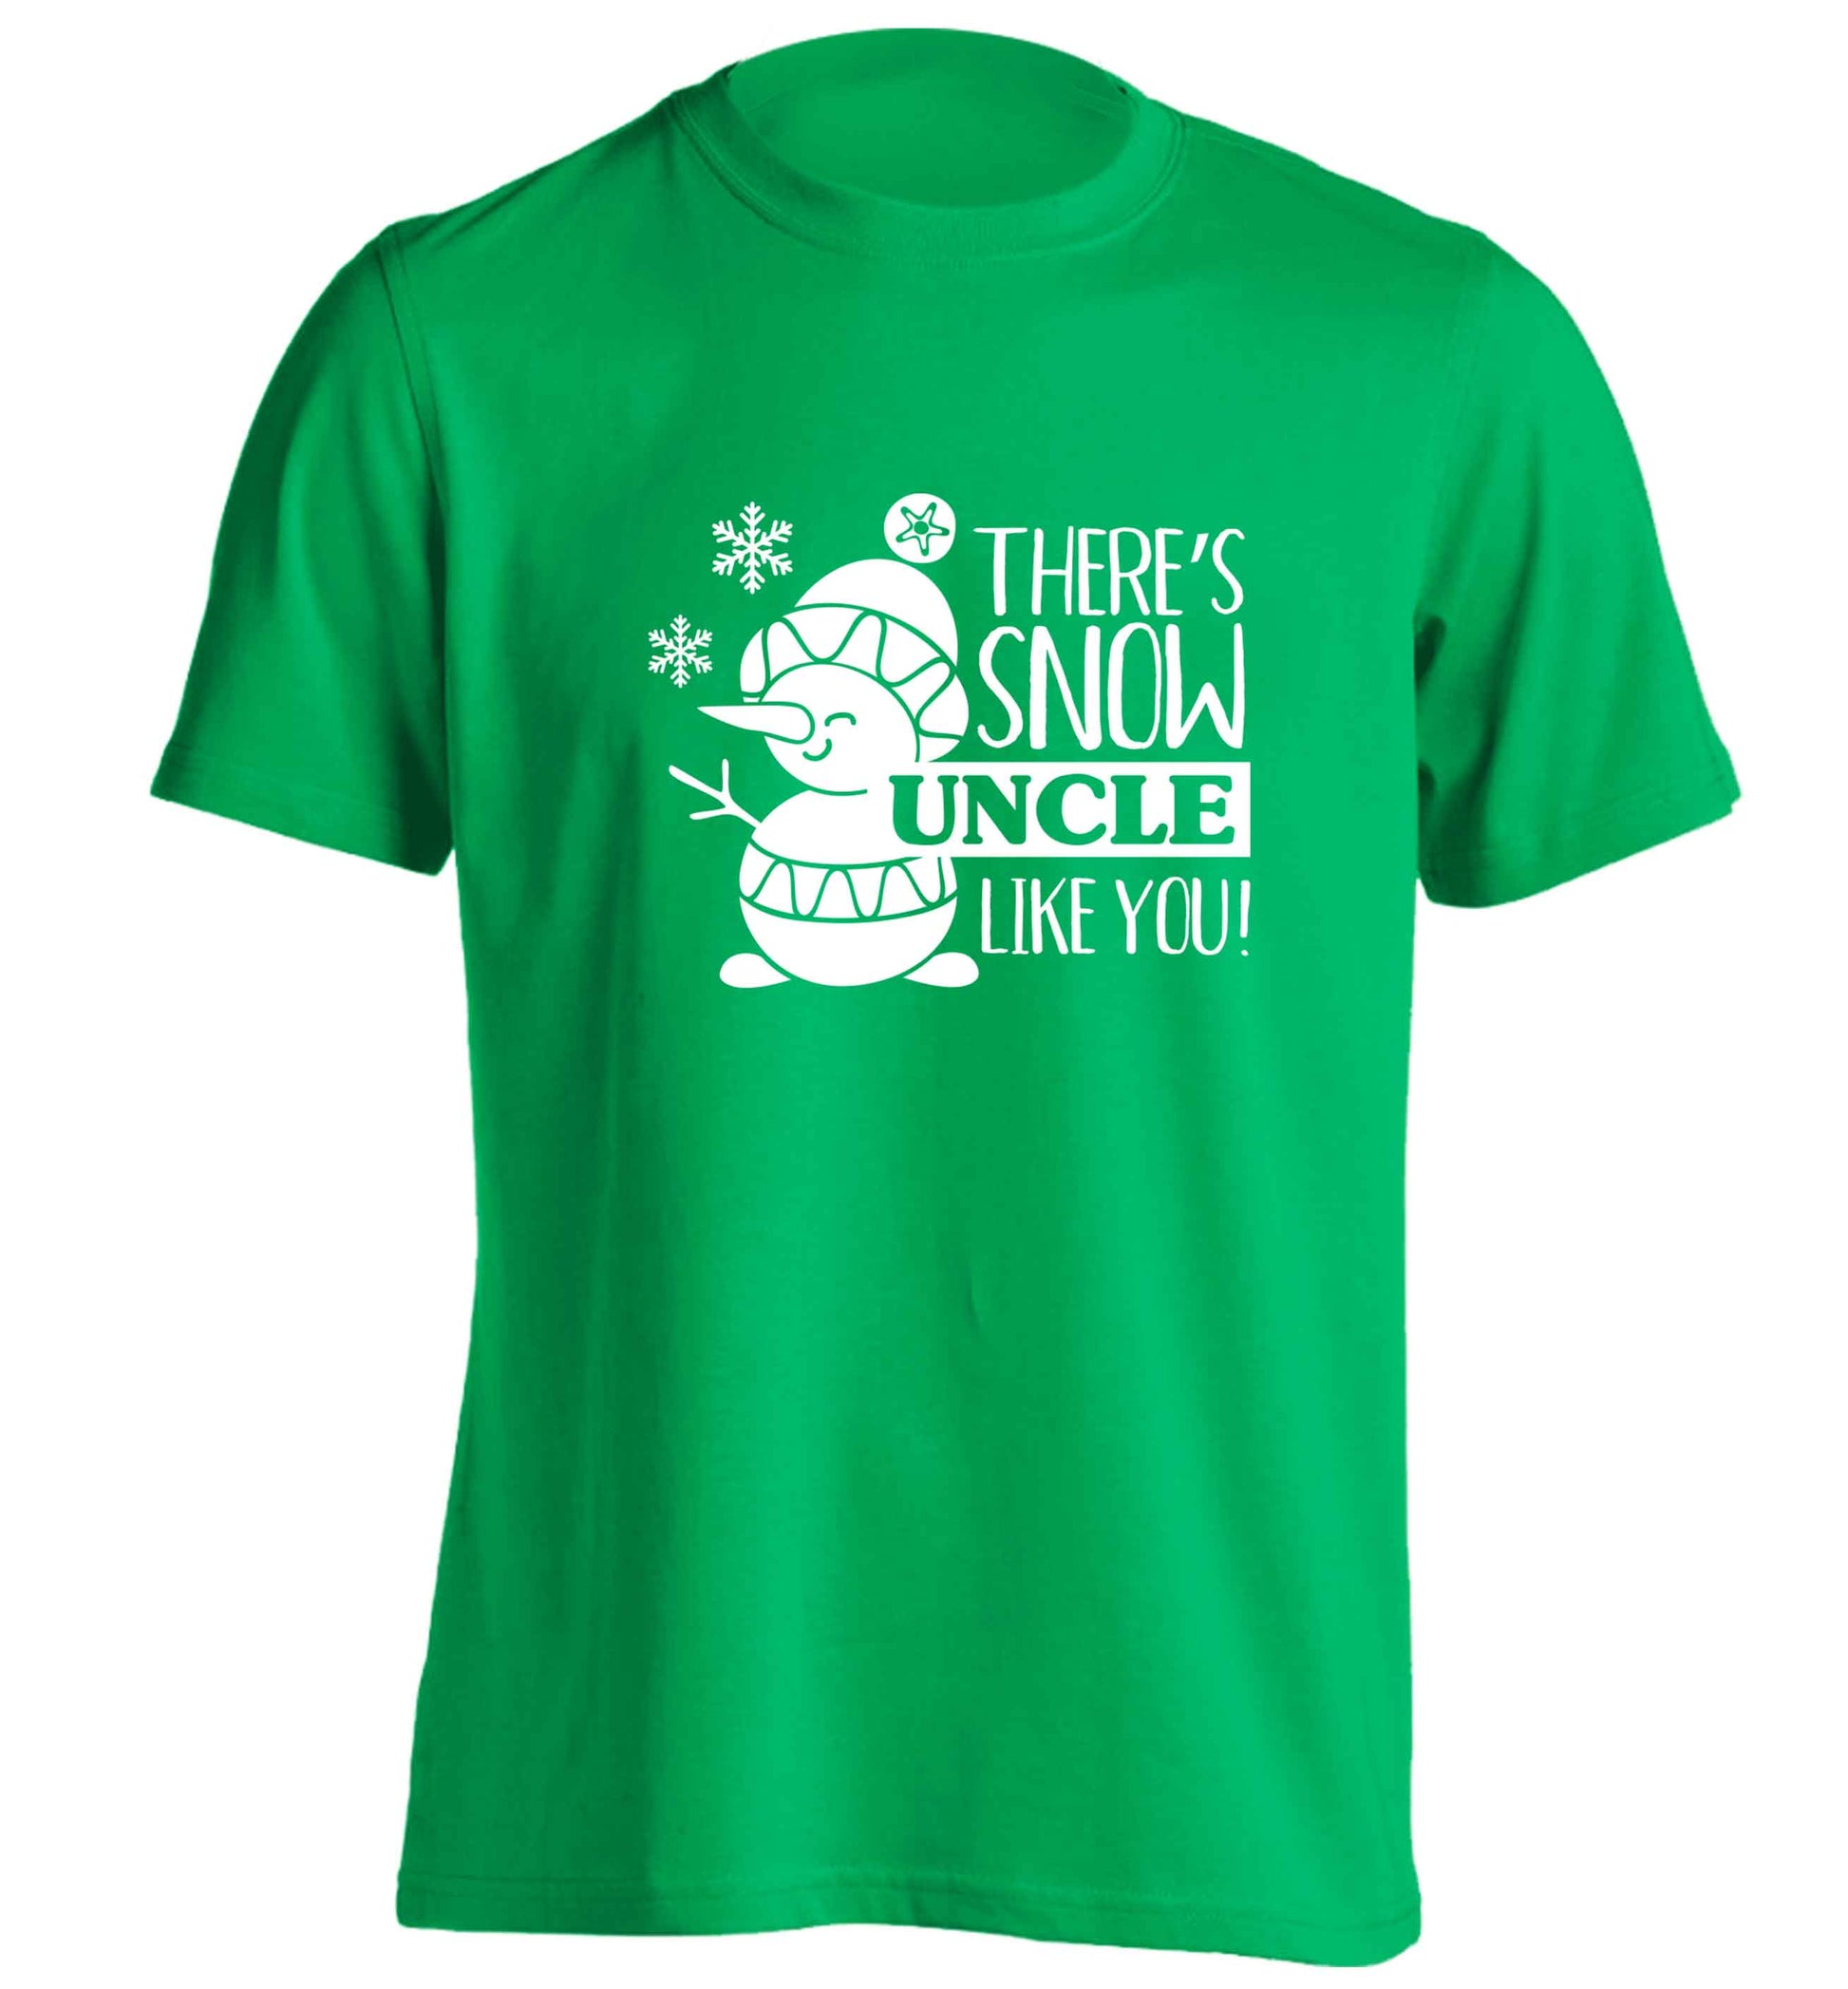 There's snow uncle like you adults unisex green Tshirt 2XL